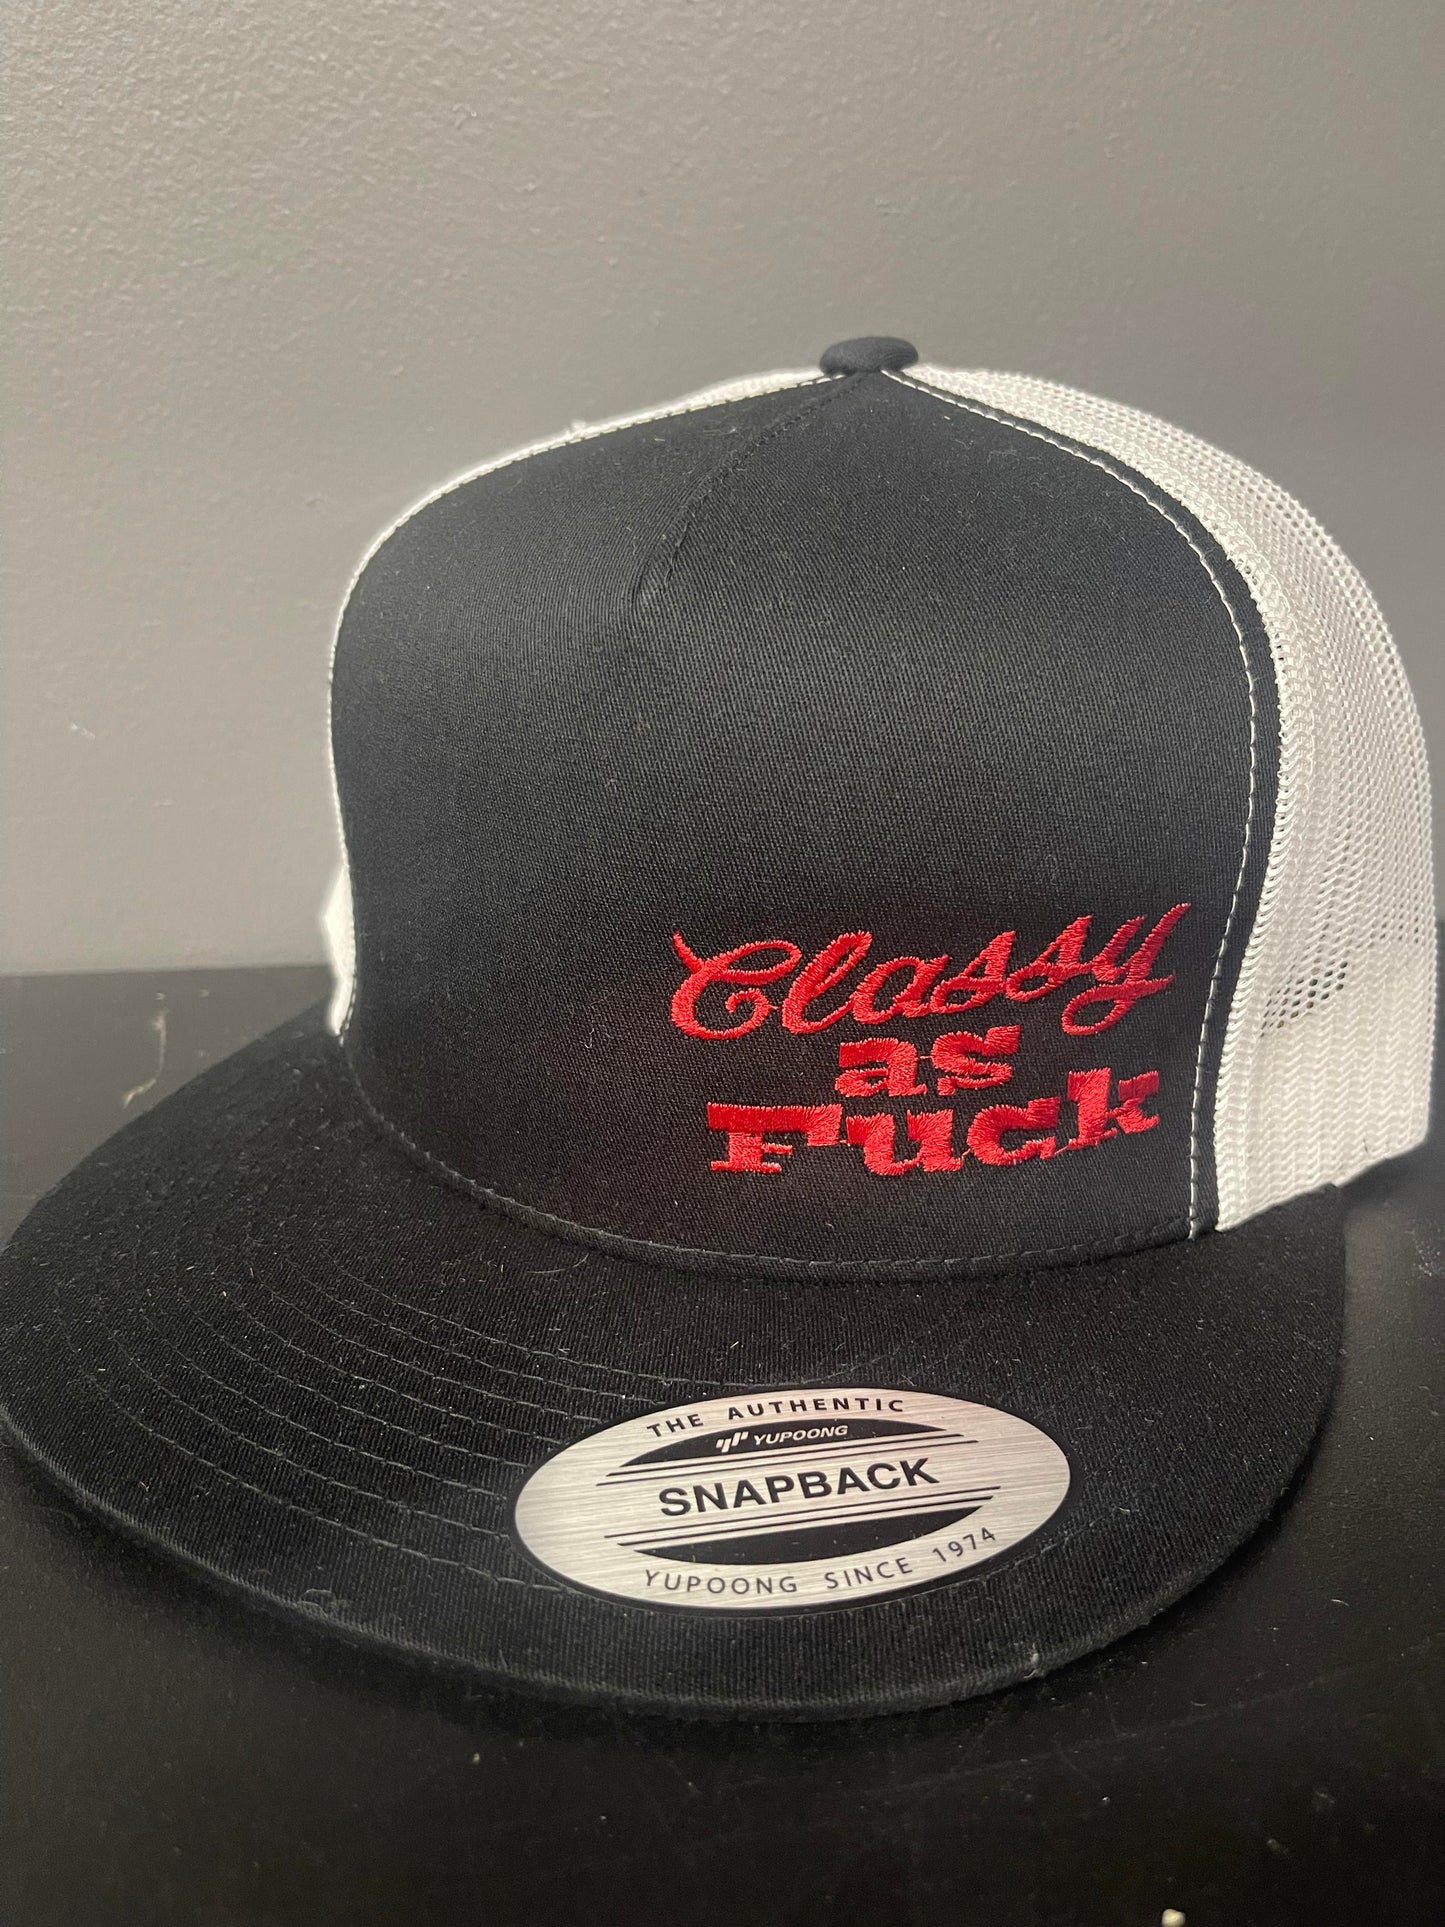 classy as fuck snap back hat